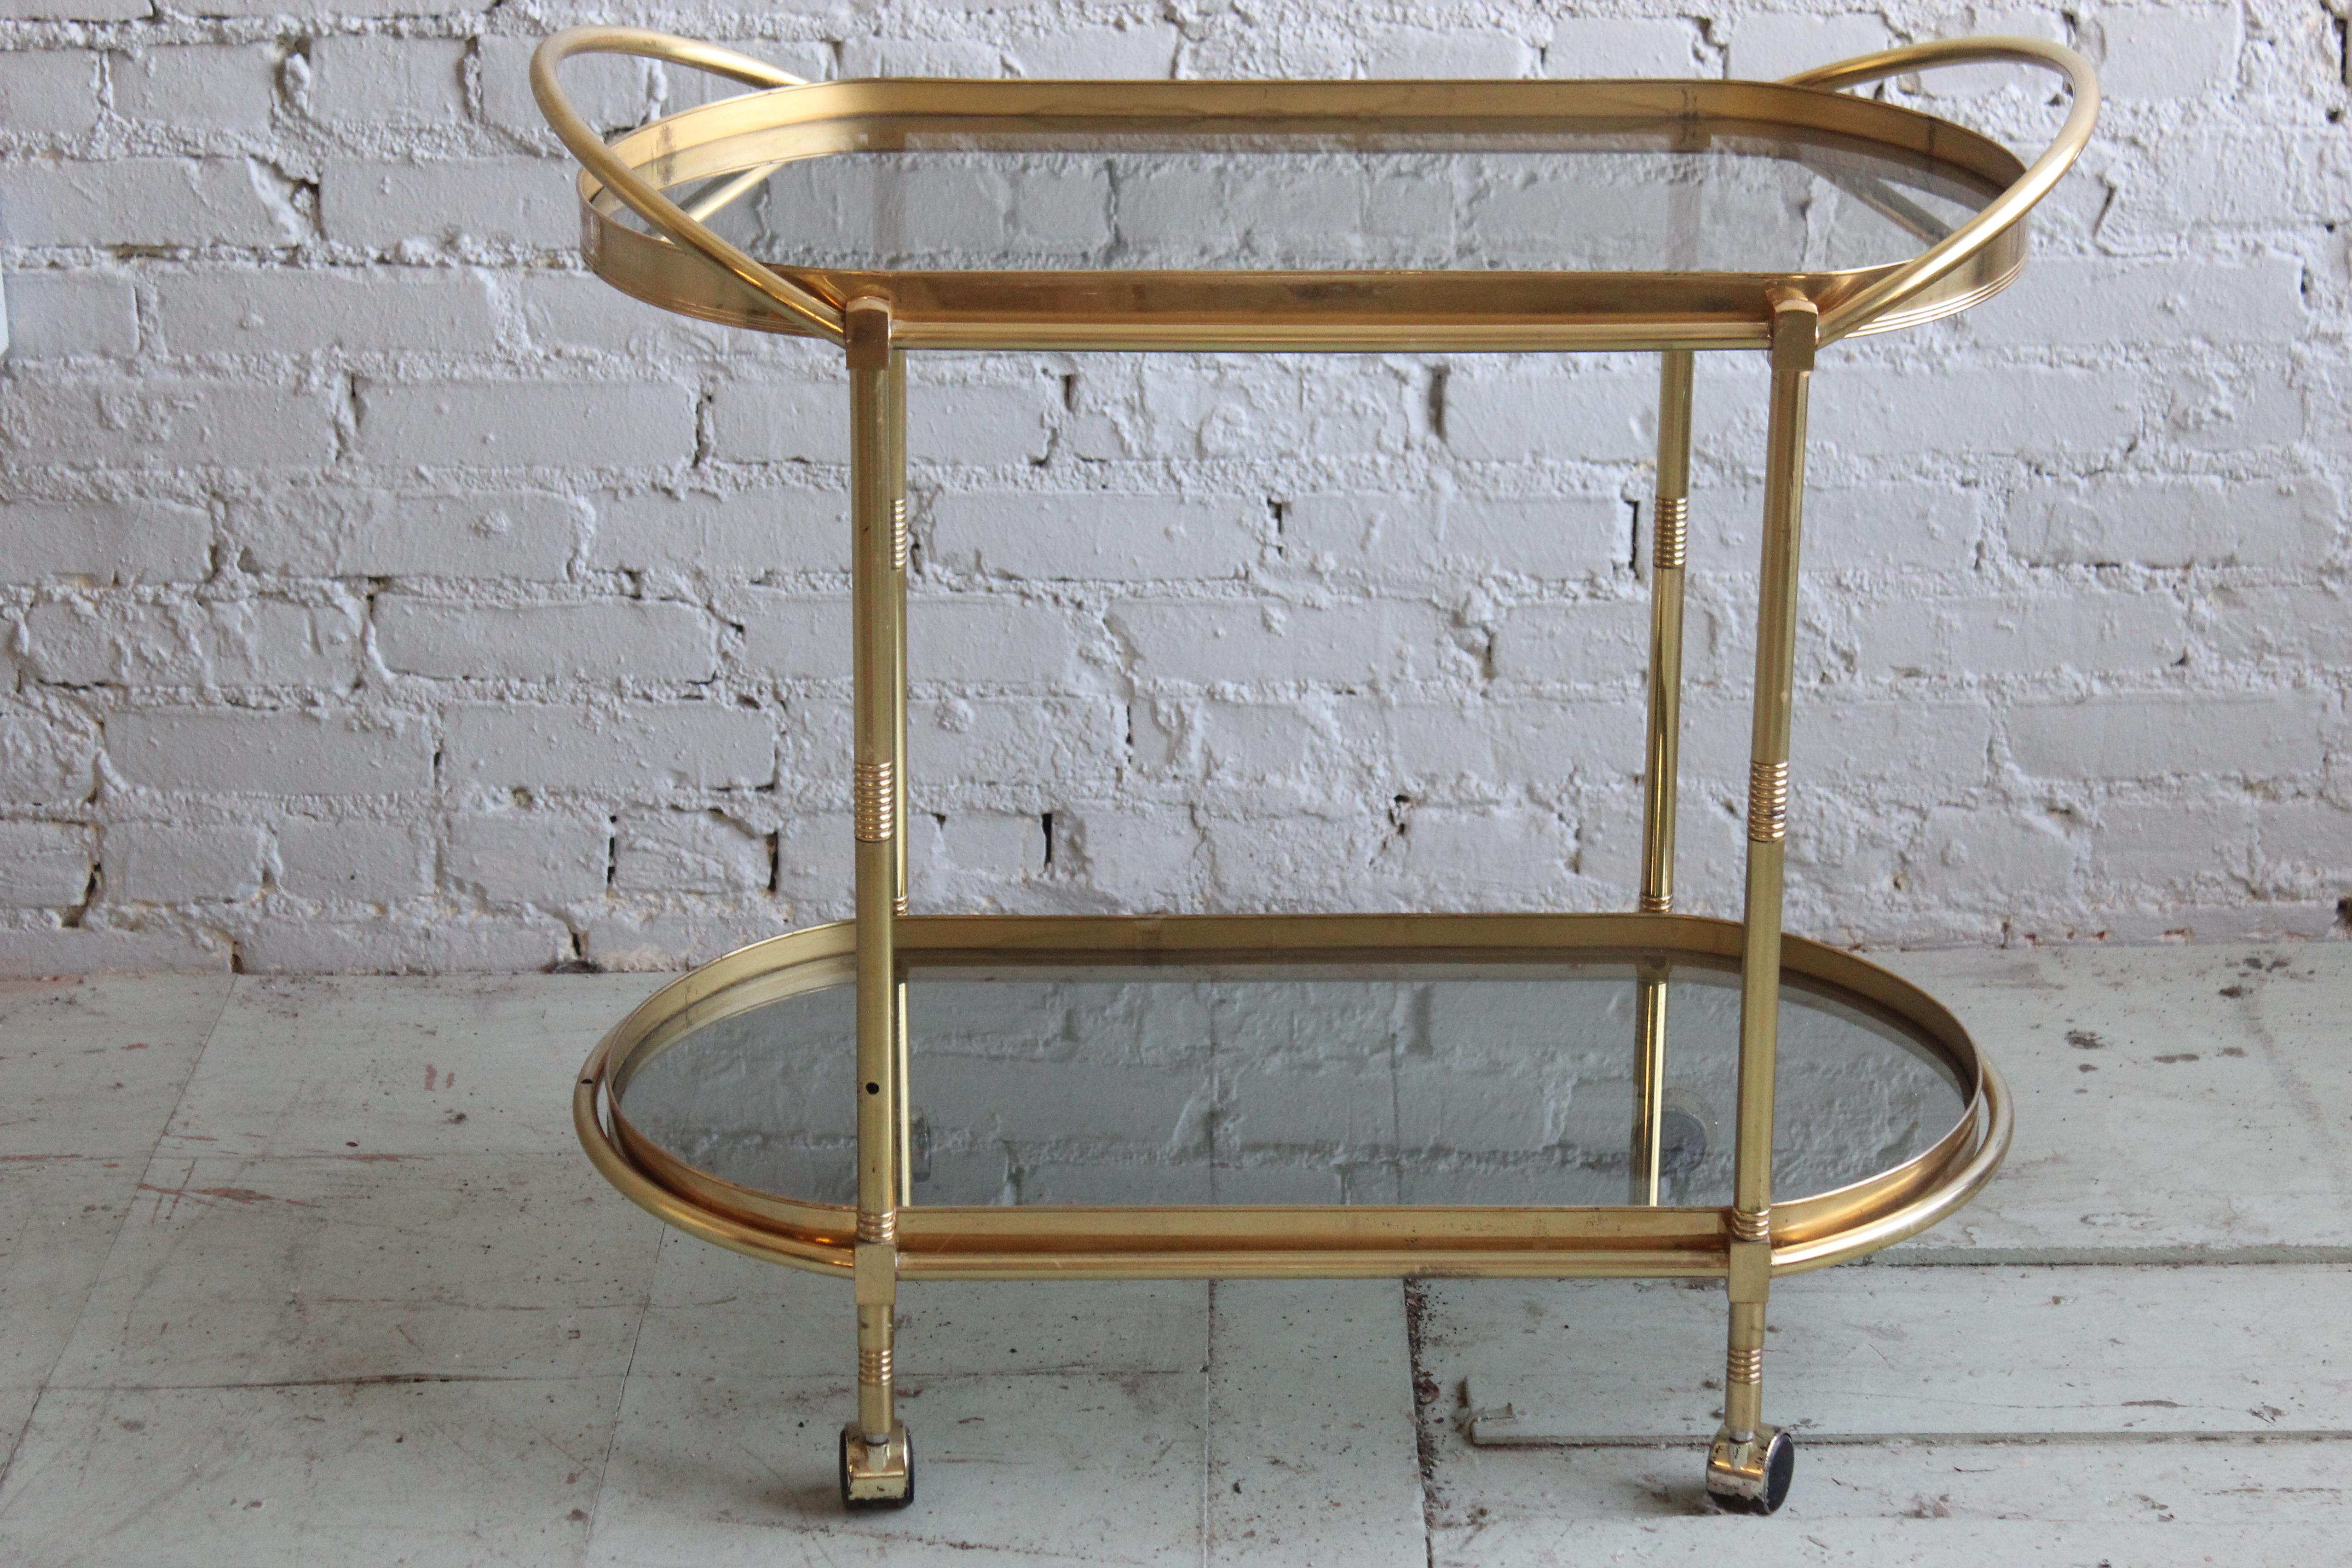 Two-tier brass bar cart. The glass tray is removable.